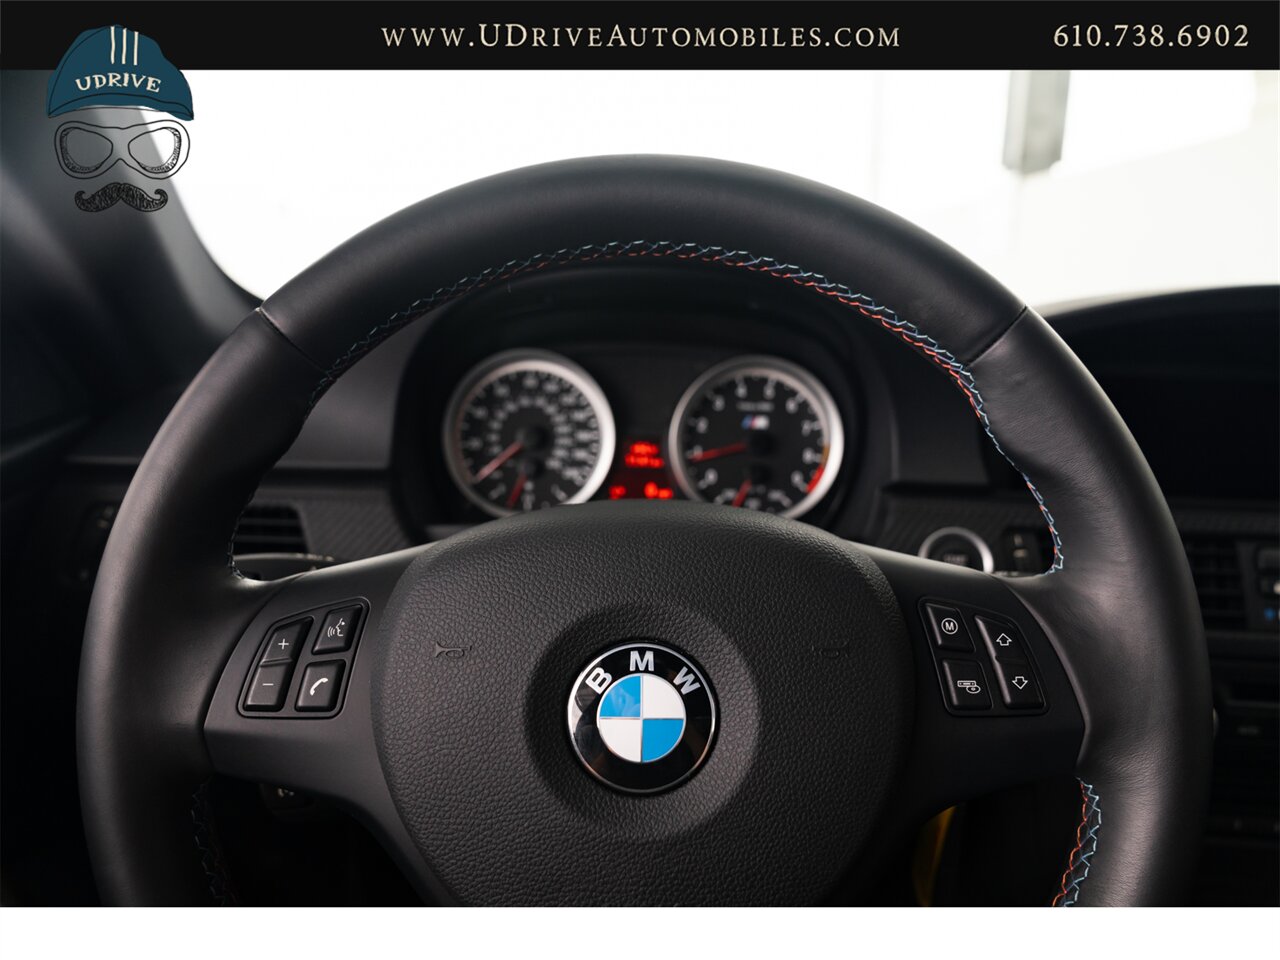 2012 BMW M3 E92 6 Speed 7k Miles Dinan Upgrades  GTS/359 Wheels Carbon Fiber Roof - Photo 29 - West Chester, PA 19382